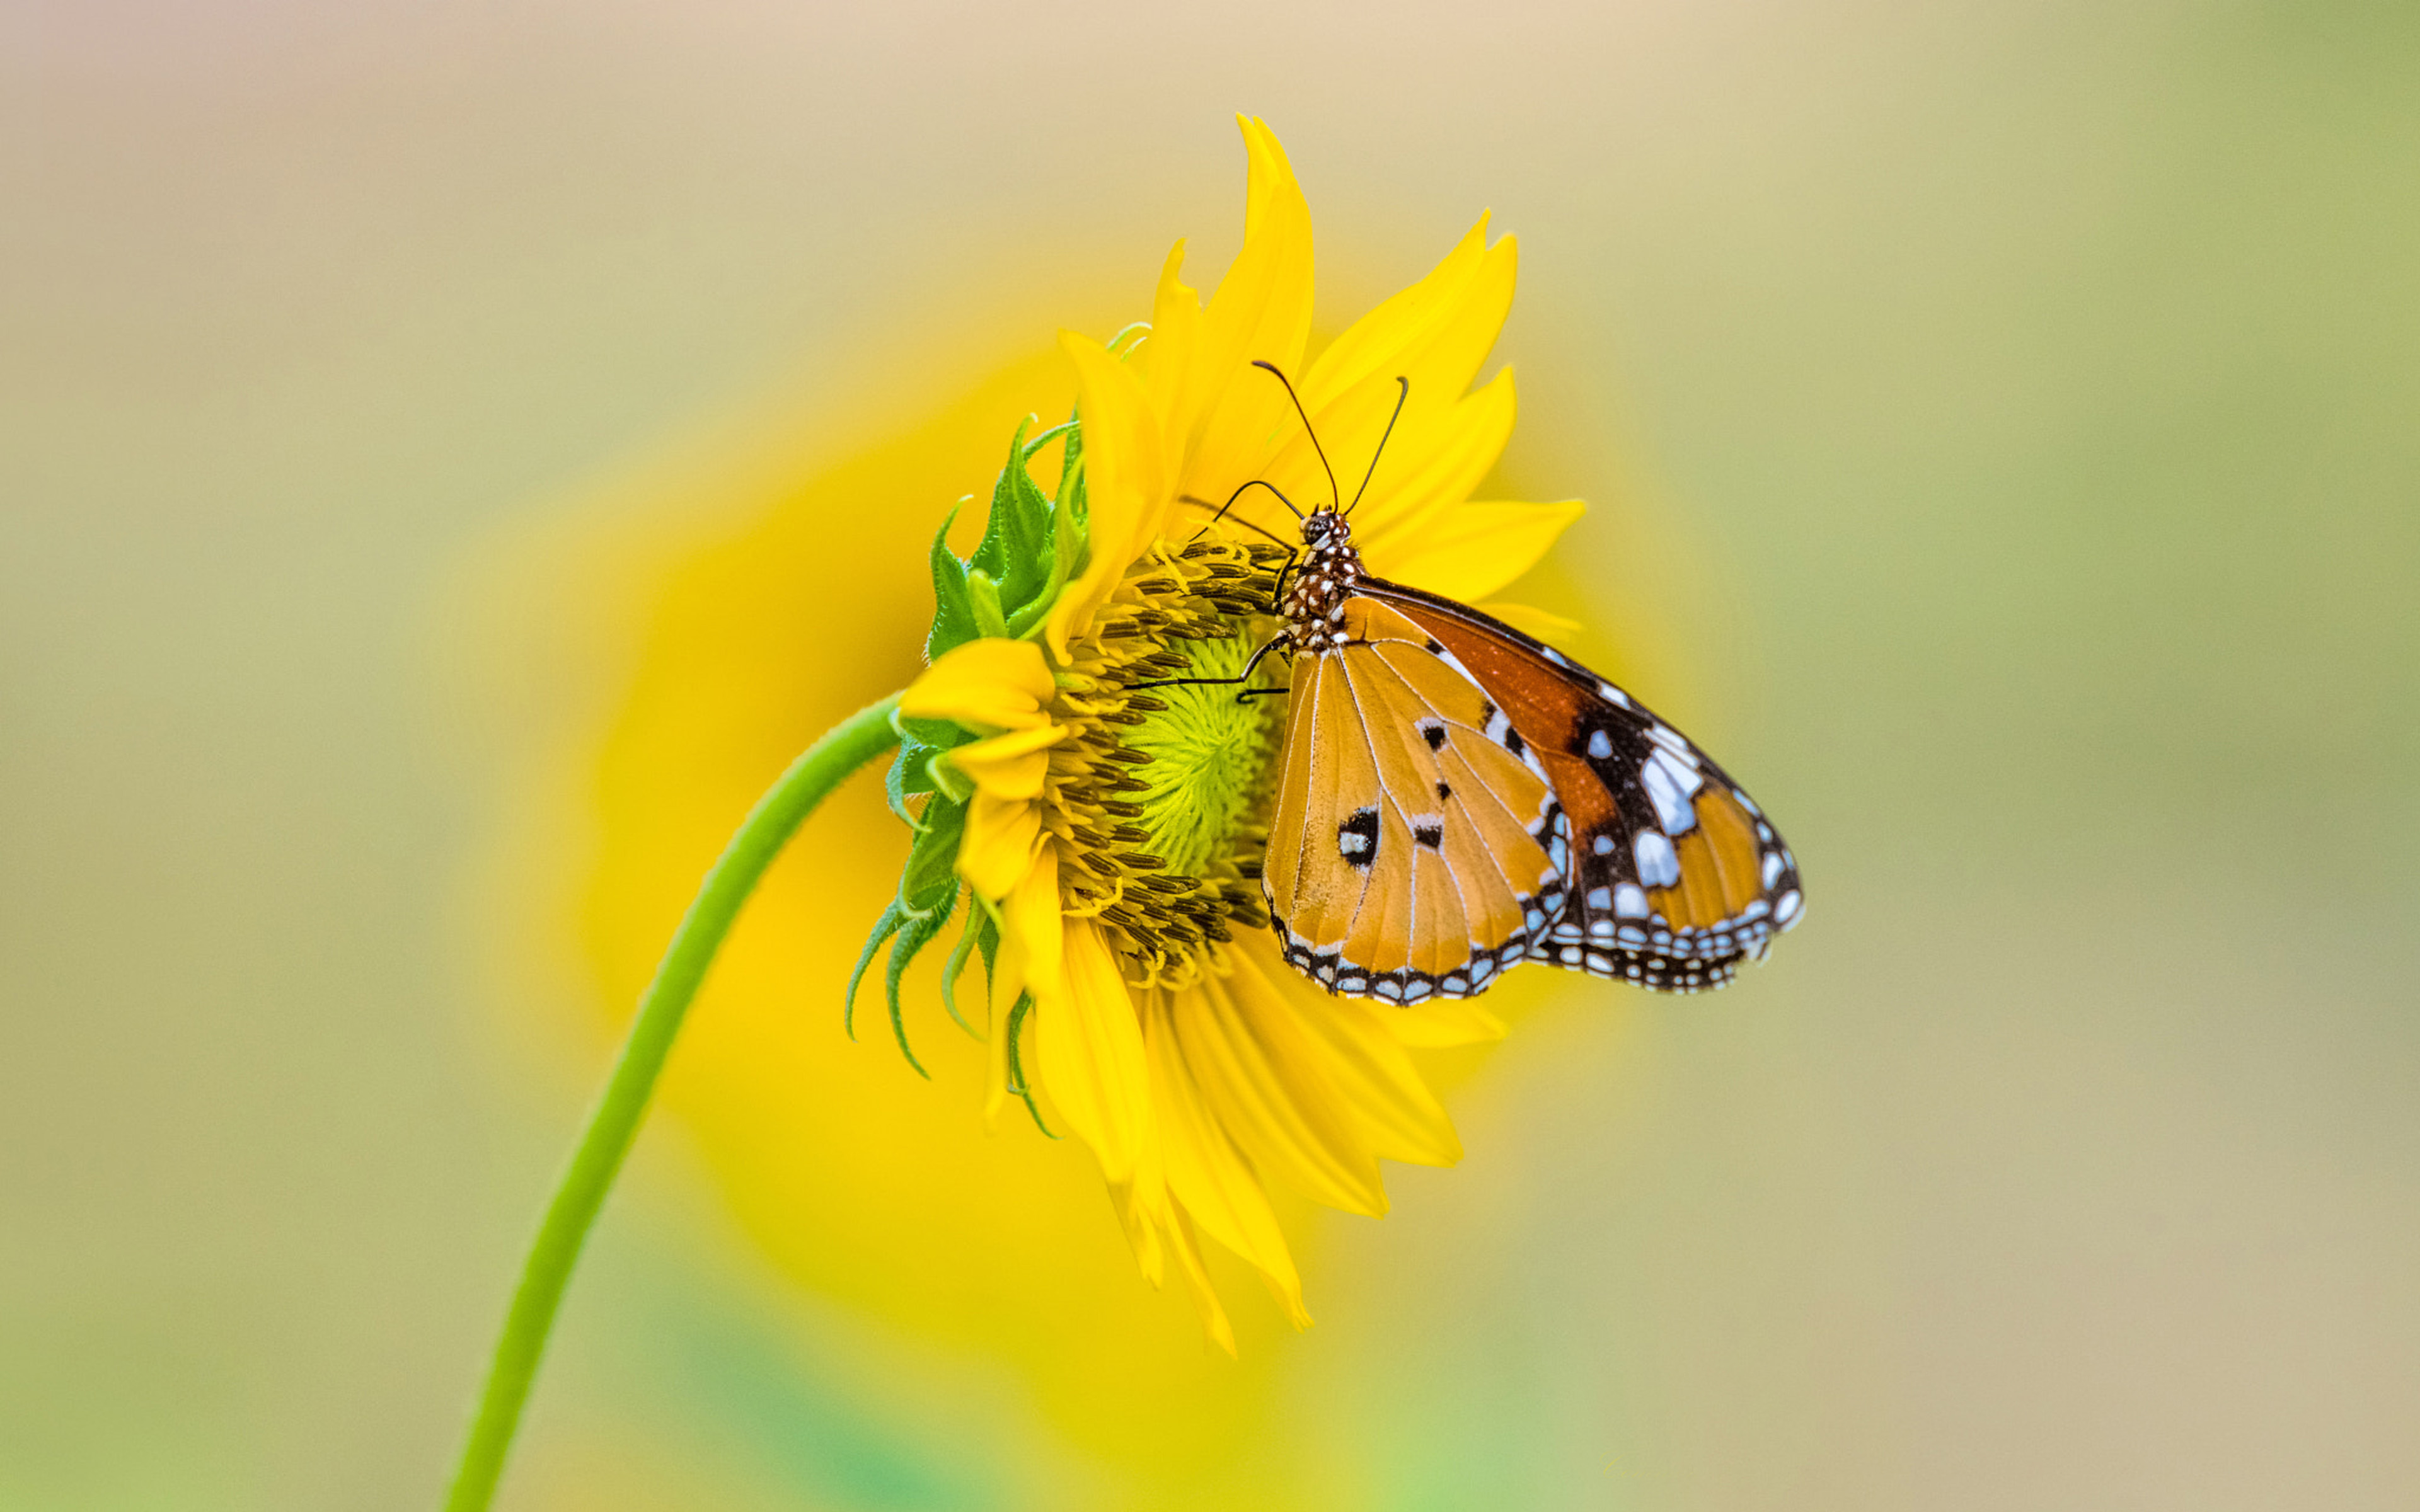 Insect Tiger Butterfly On Yellow Color From Sunflower 4k Ultra Hd Tv  Wallpaper For Desktop Laptop Tablet And Mobile Phones 3840x2400 :  